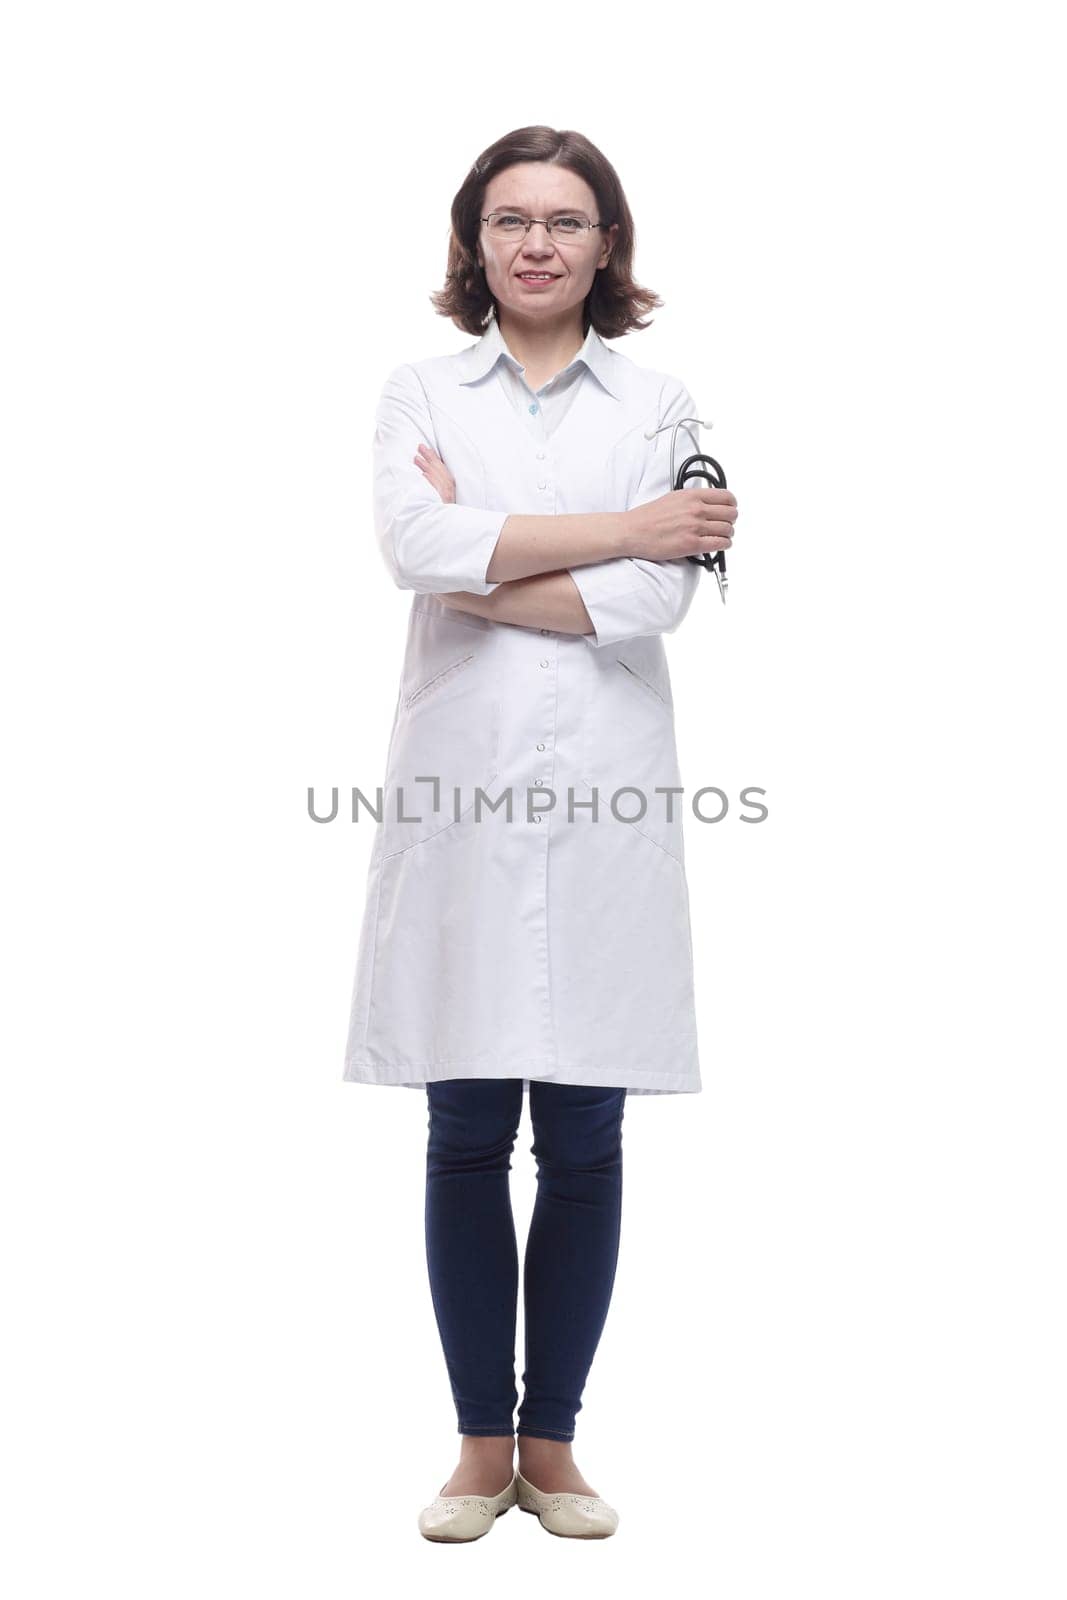 female doctor with a stethoscope. isolated on a white background.